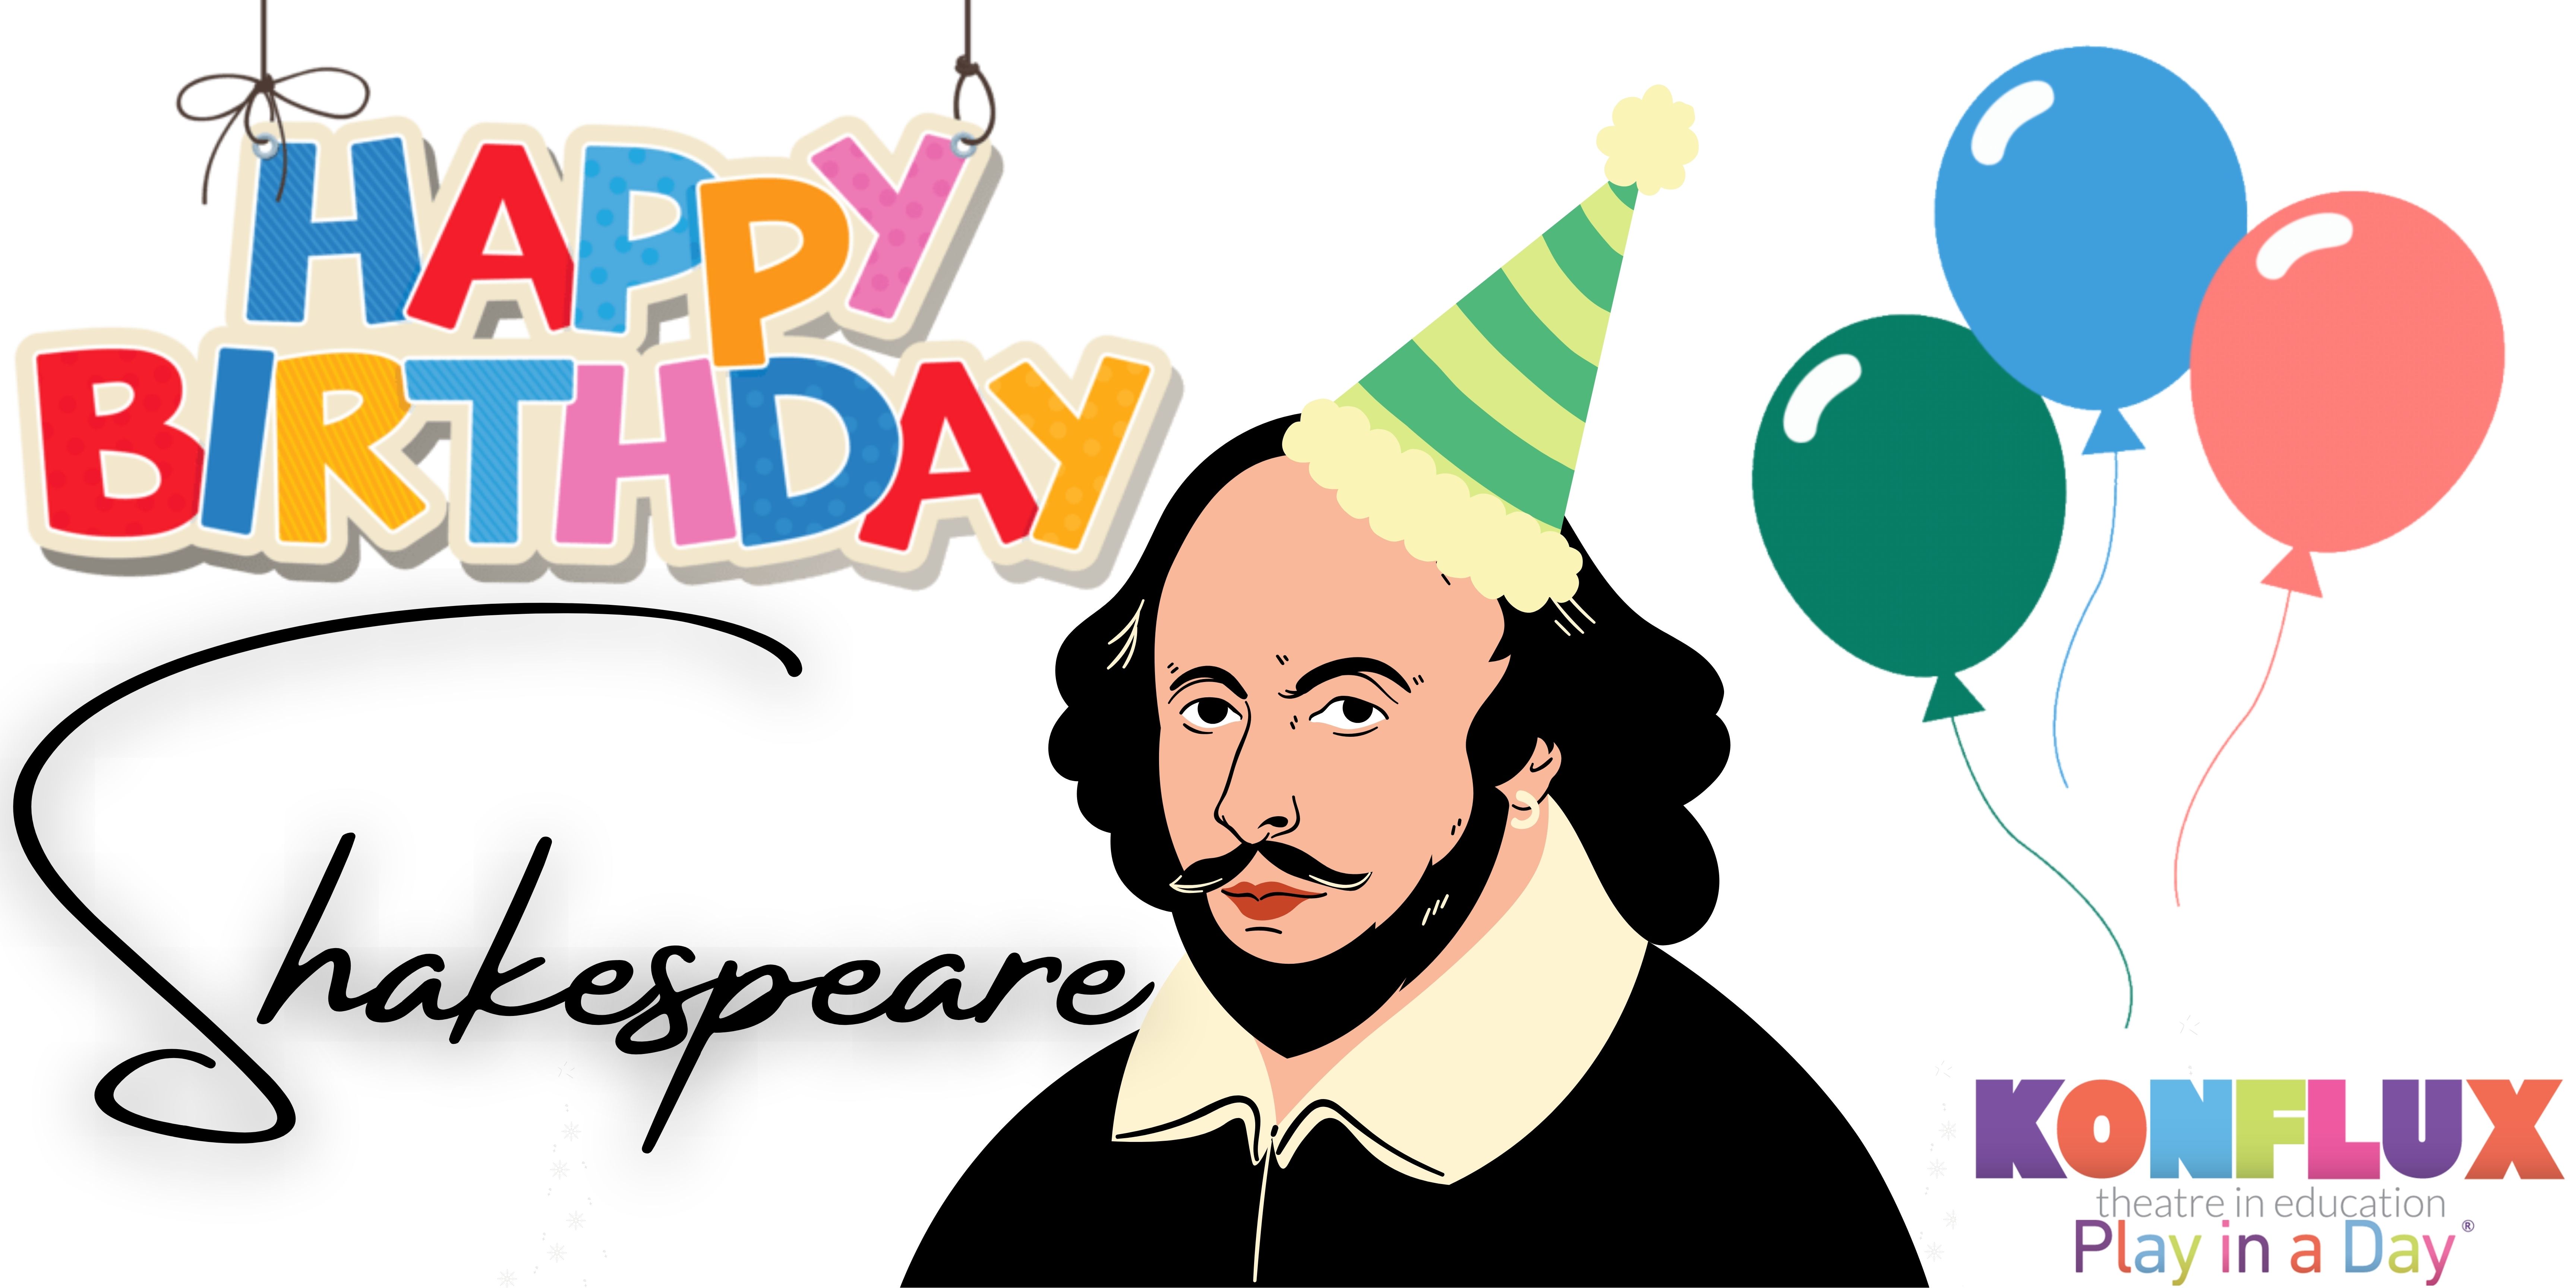 Shakespeare's Birthday!! Konflux Theatre in Education